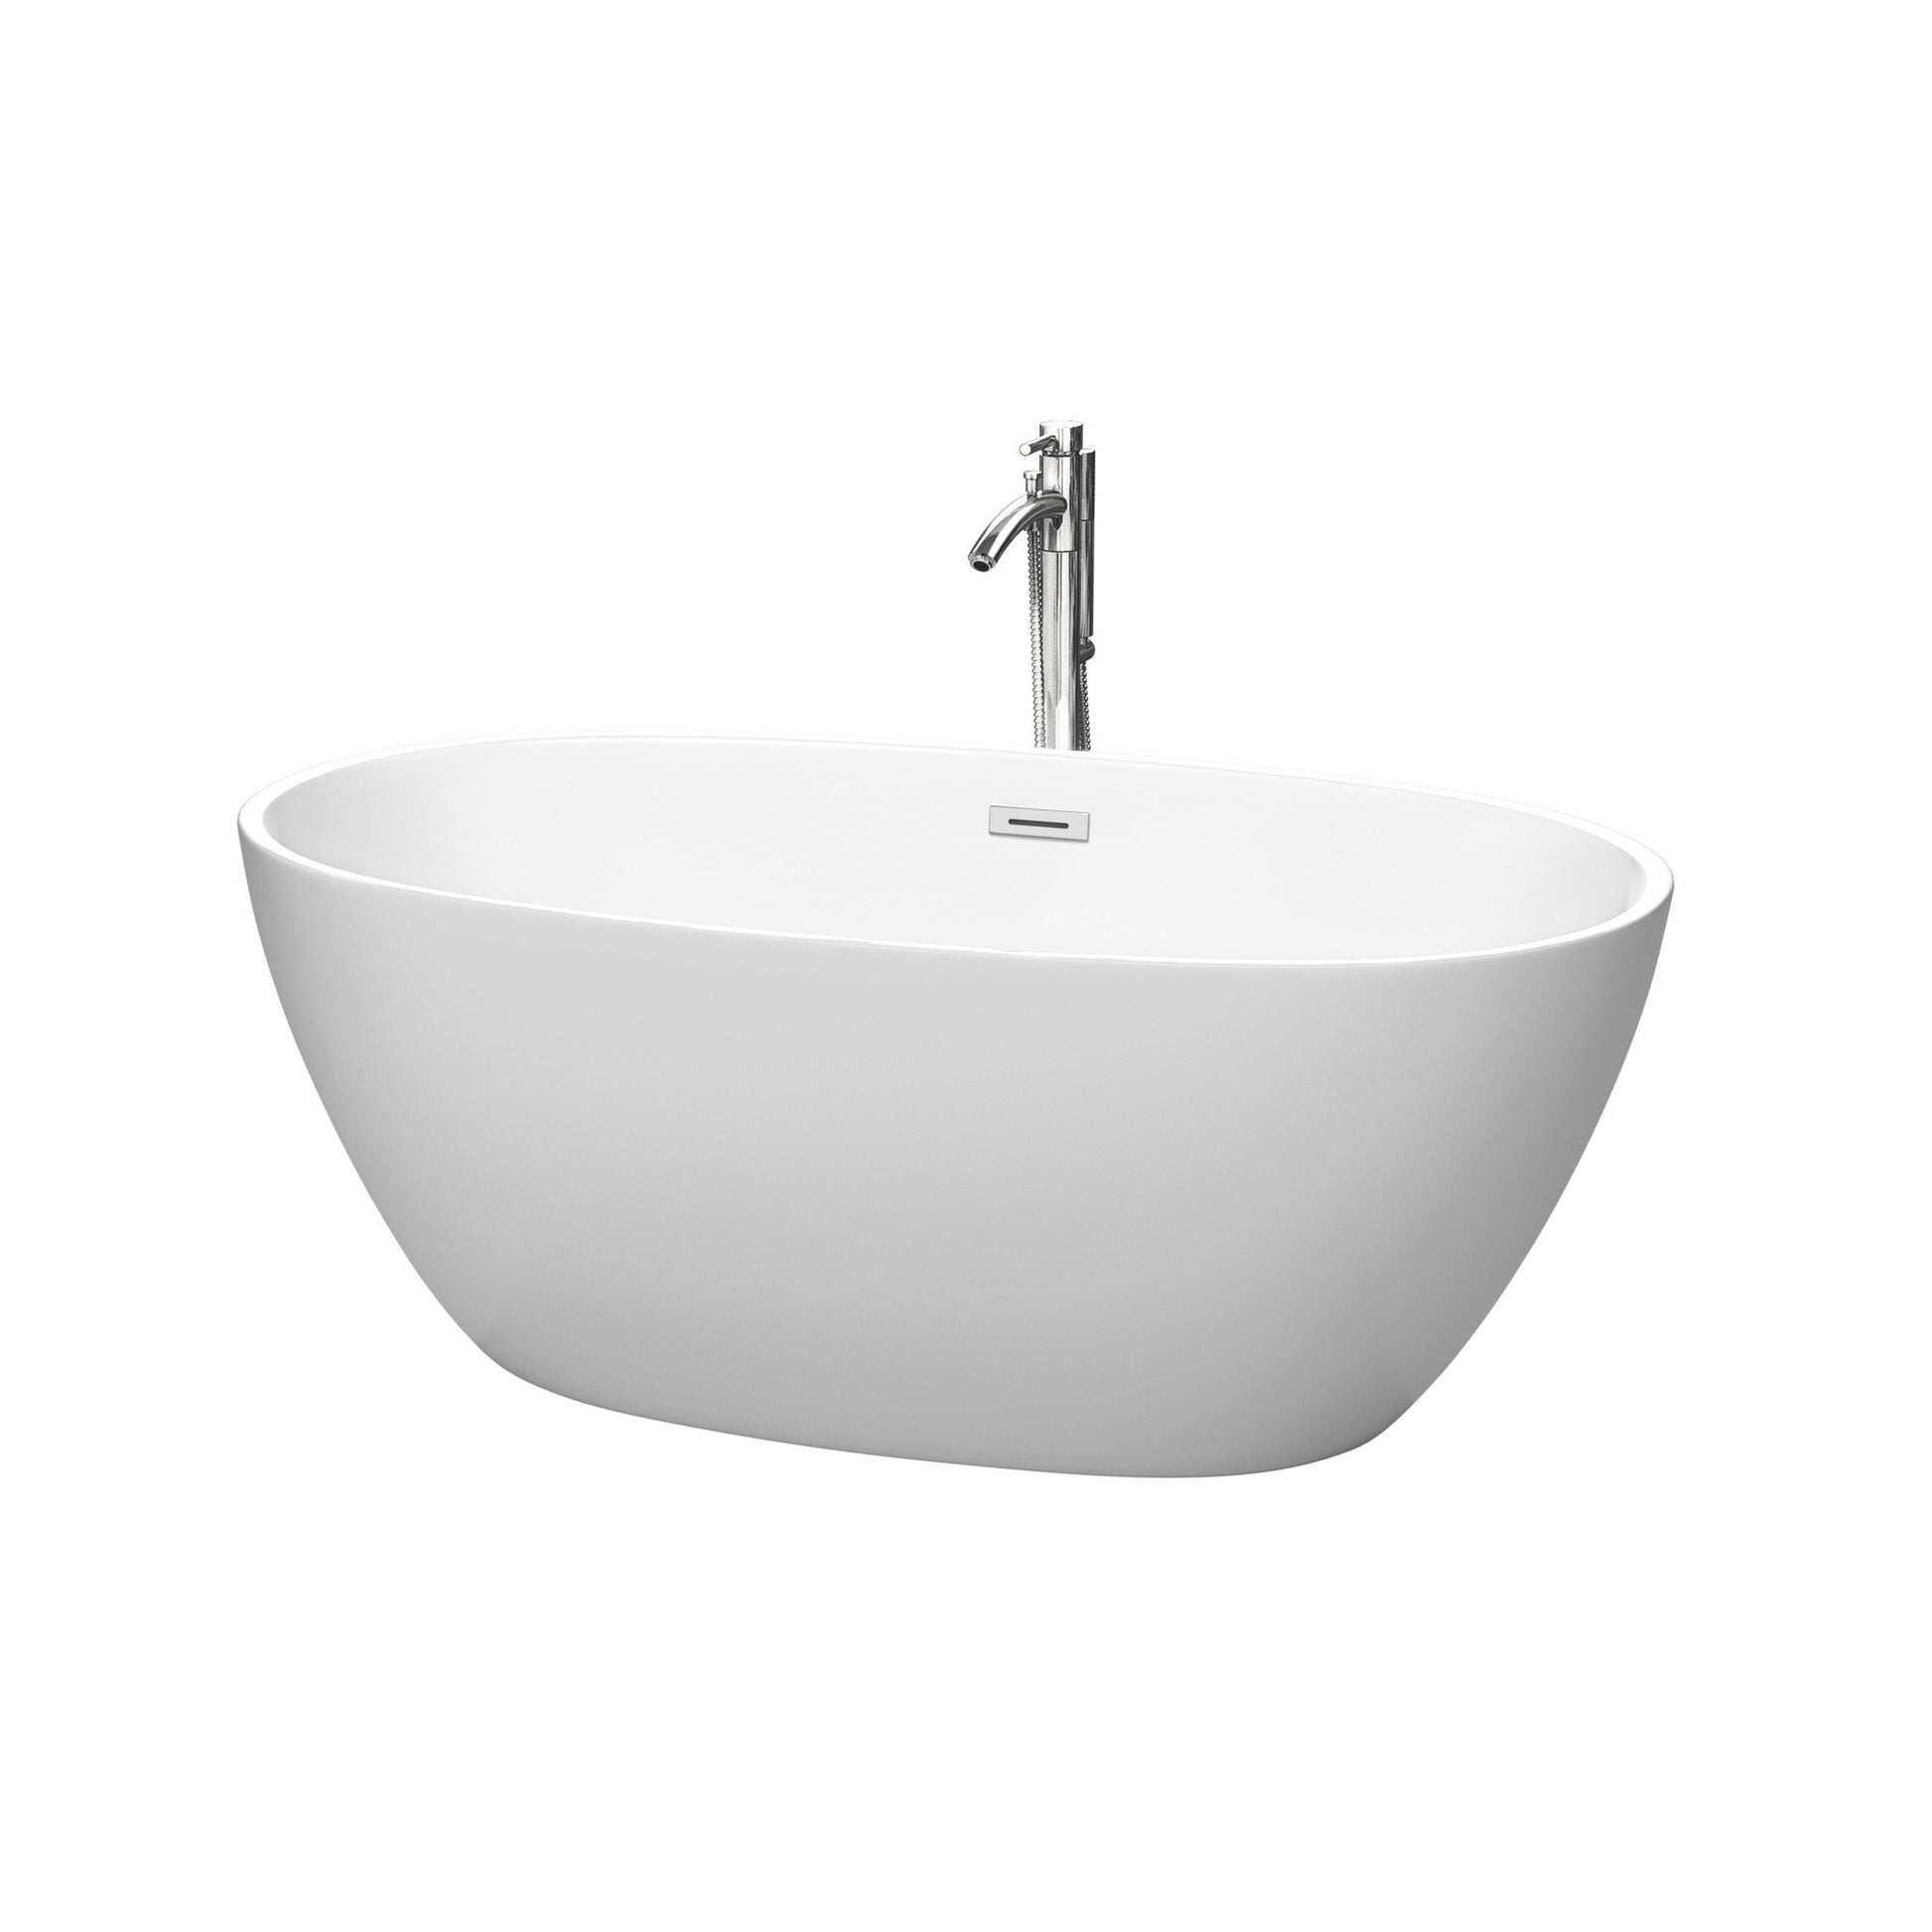 Wyndham Collection Juno 59" Freestanding Bathtub in Matte White With Floor Mounted Faucet, Drain and Overflow Trim in Polished Chrome